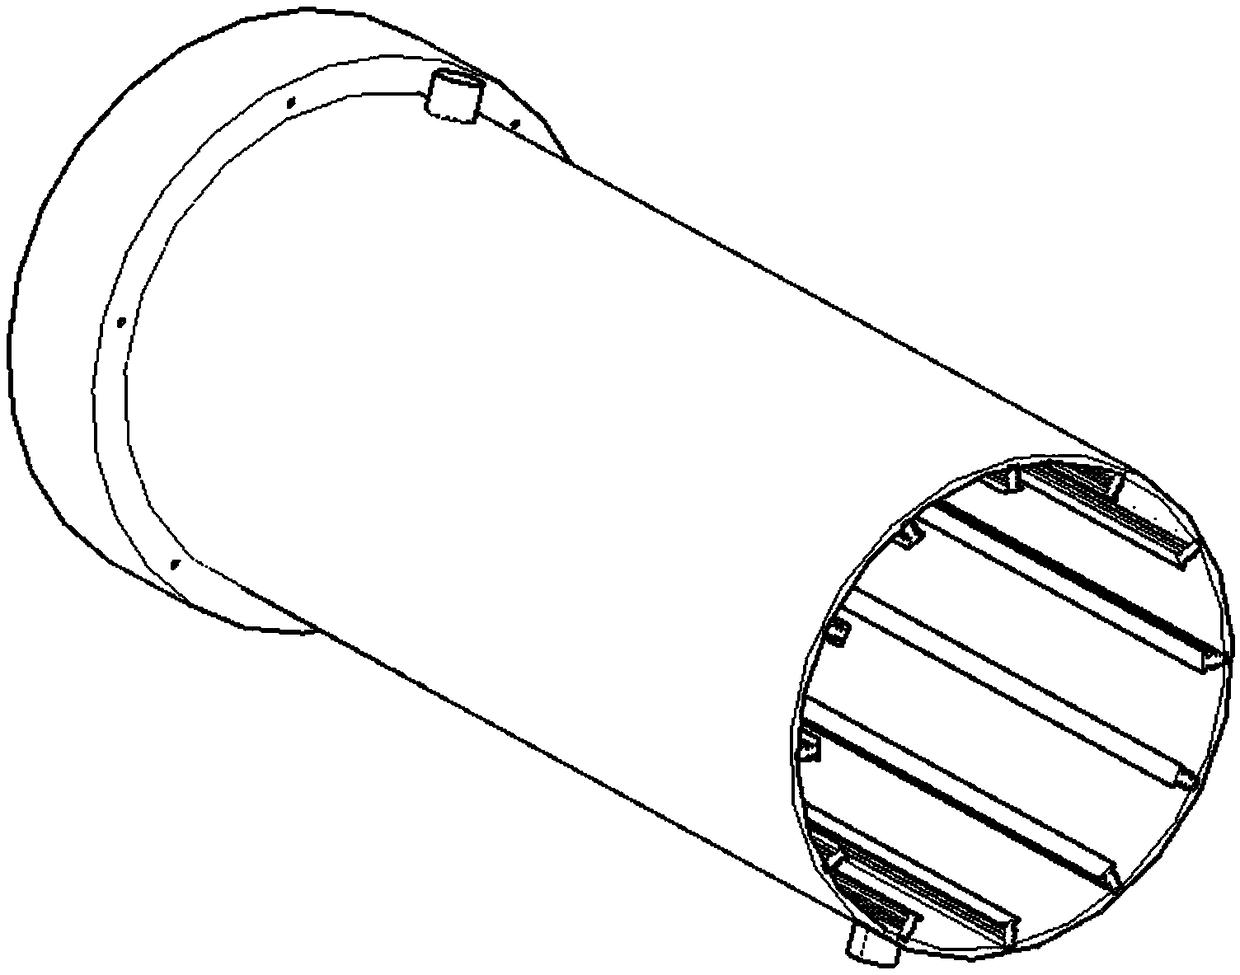 Launcher barrel cooling water jacket based on turbulent flow blades